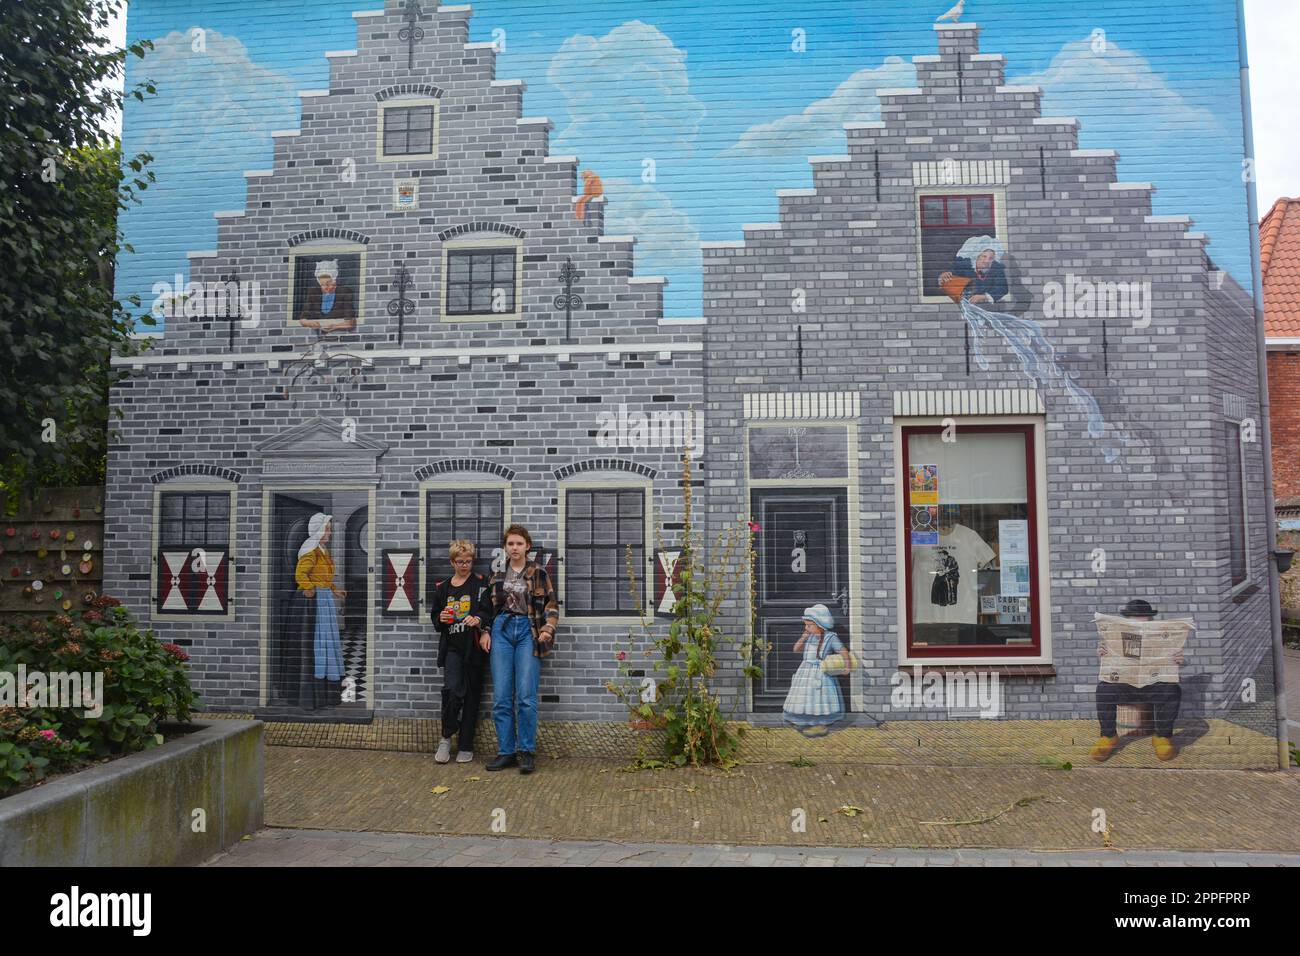 Zierikzee, Zeeland, The Netherlands , August 27th 2020 - Ornate mural on Plein Montmaertre with two children in front Stock Photo